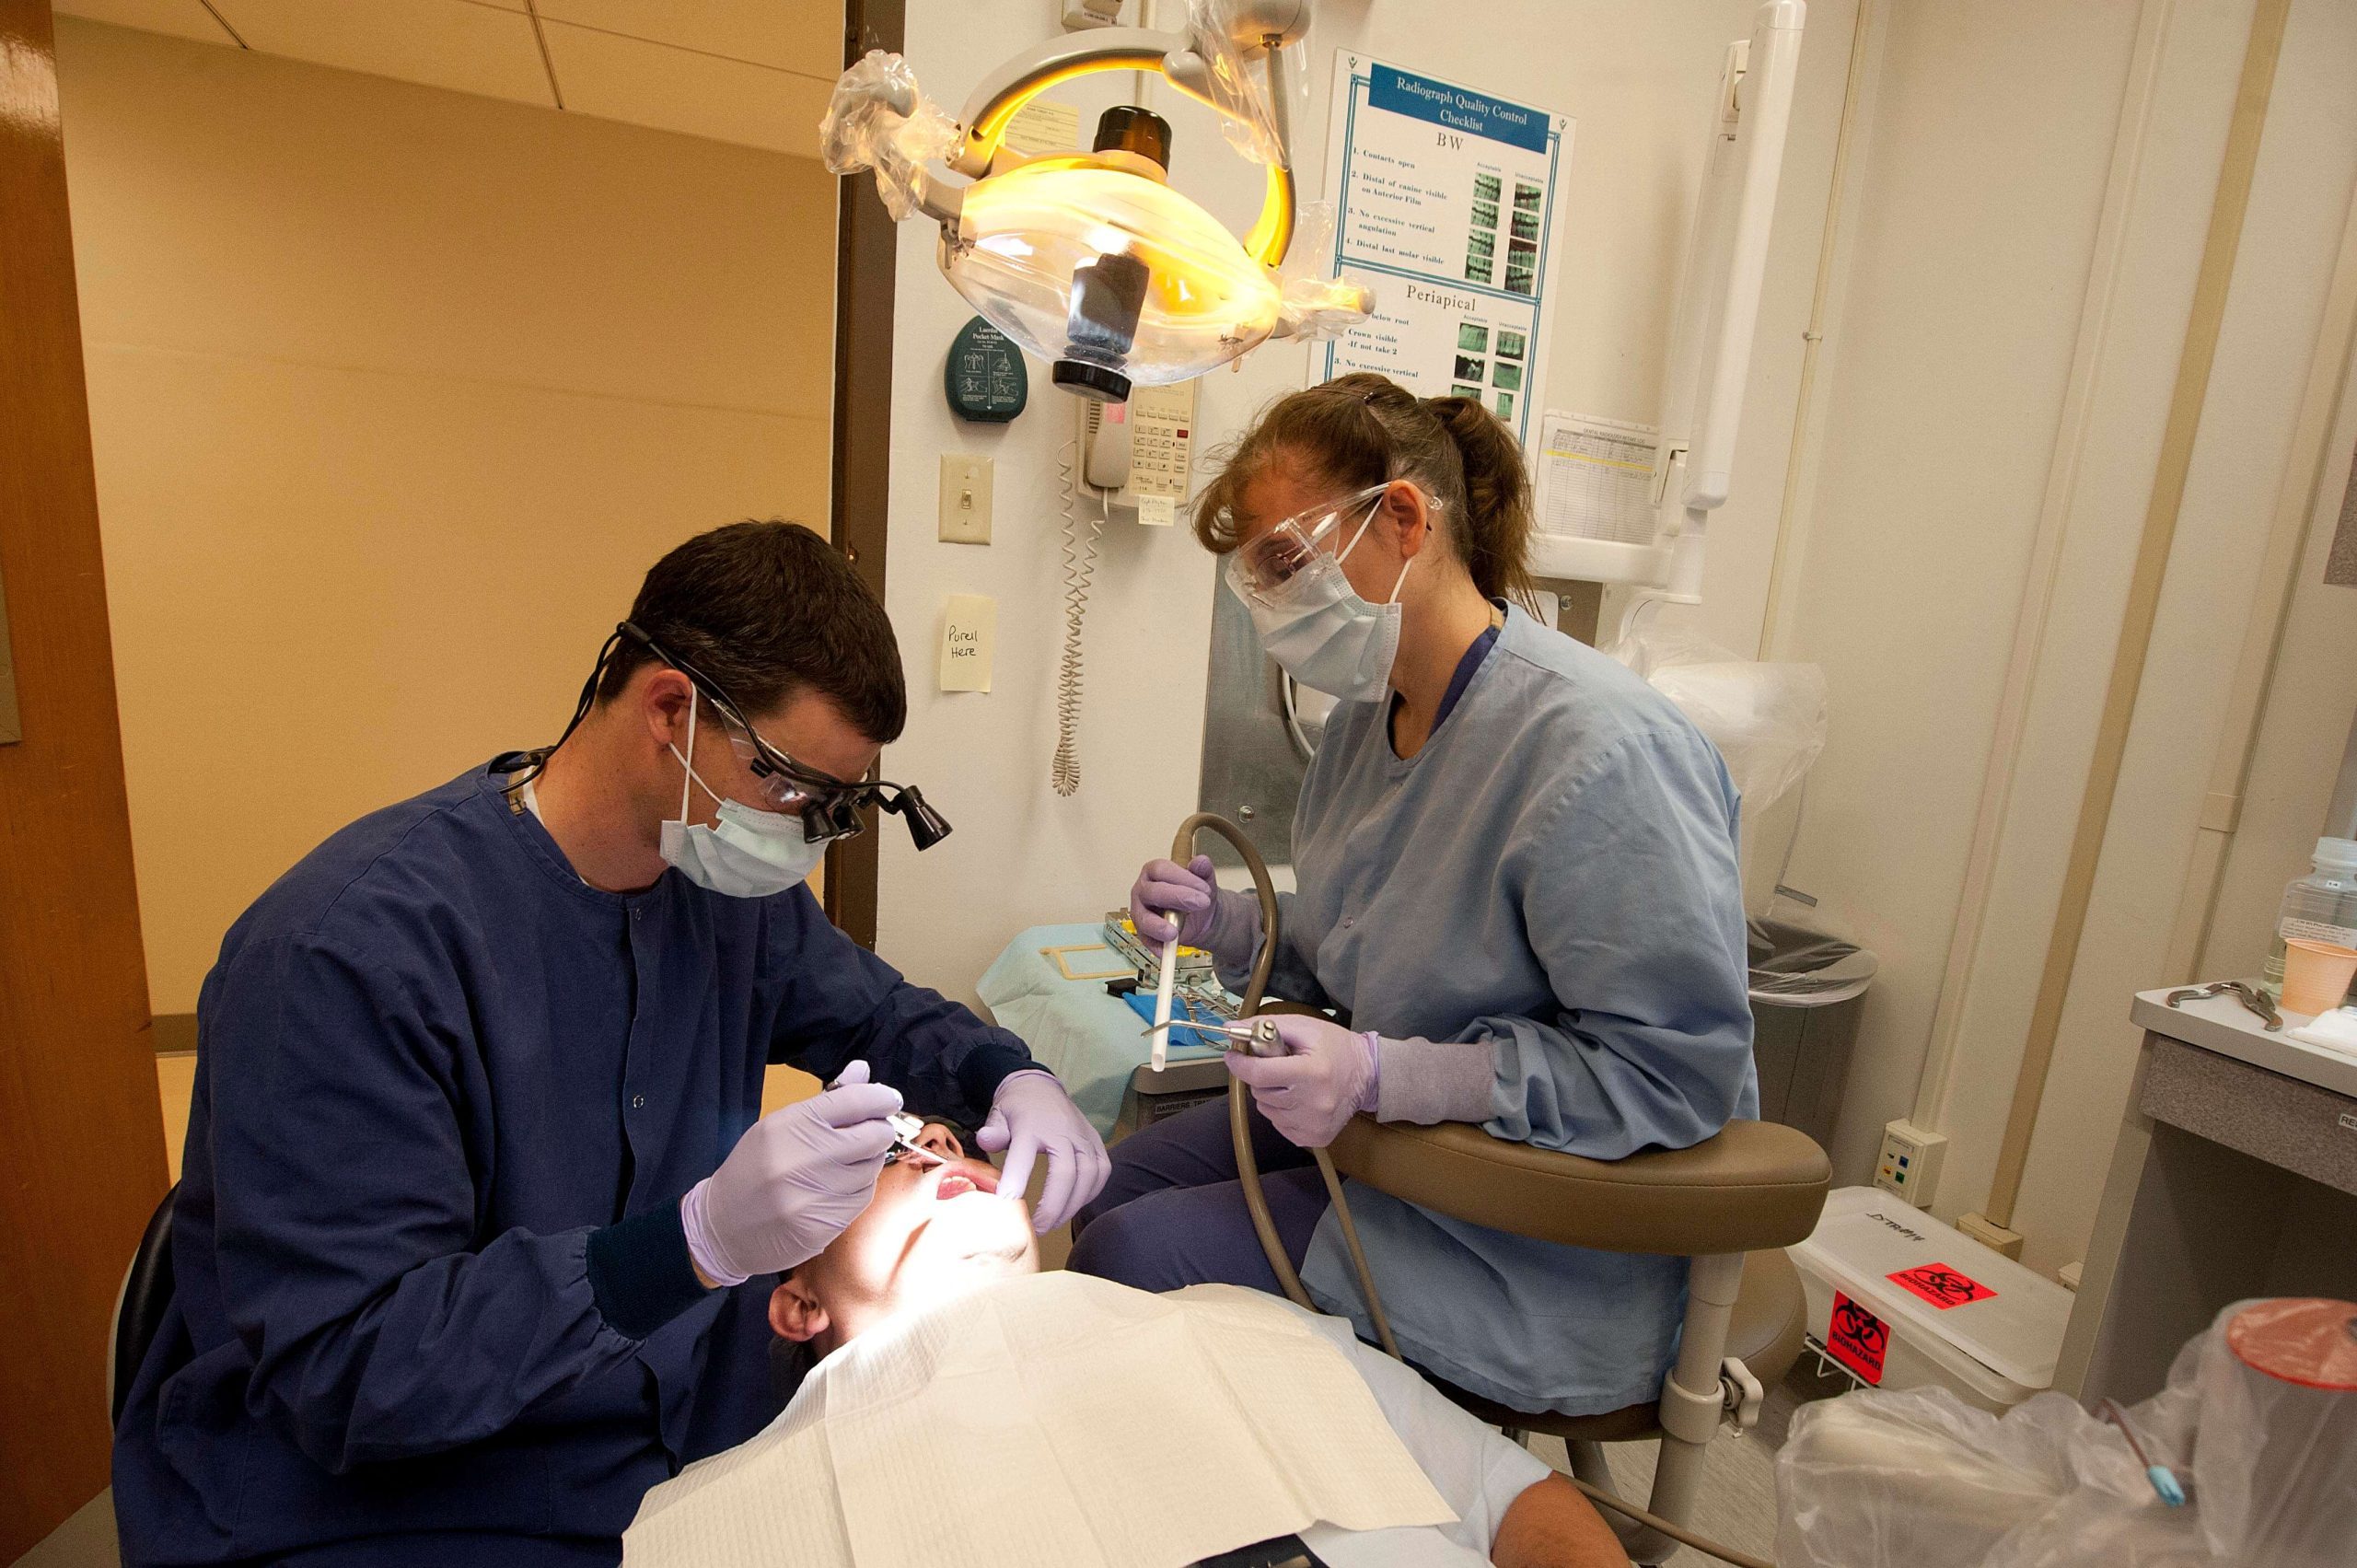 DDS Root Canal and Dr. Michael Baharestani Offered Veterans a Week of Complimentary Endodontic Treatments